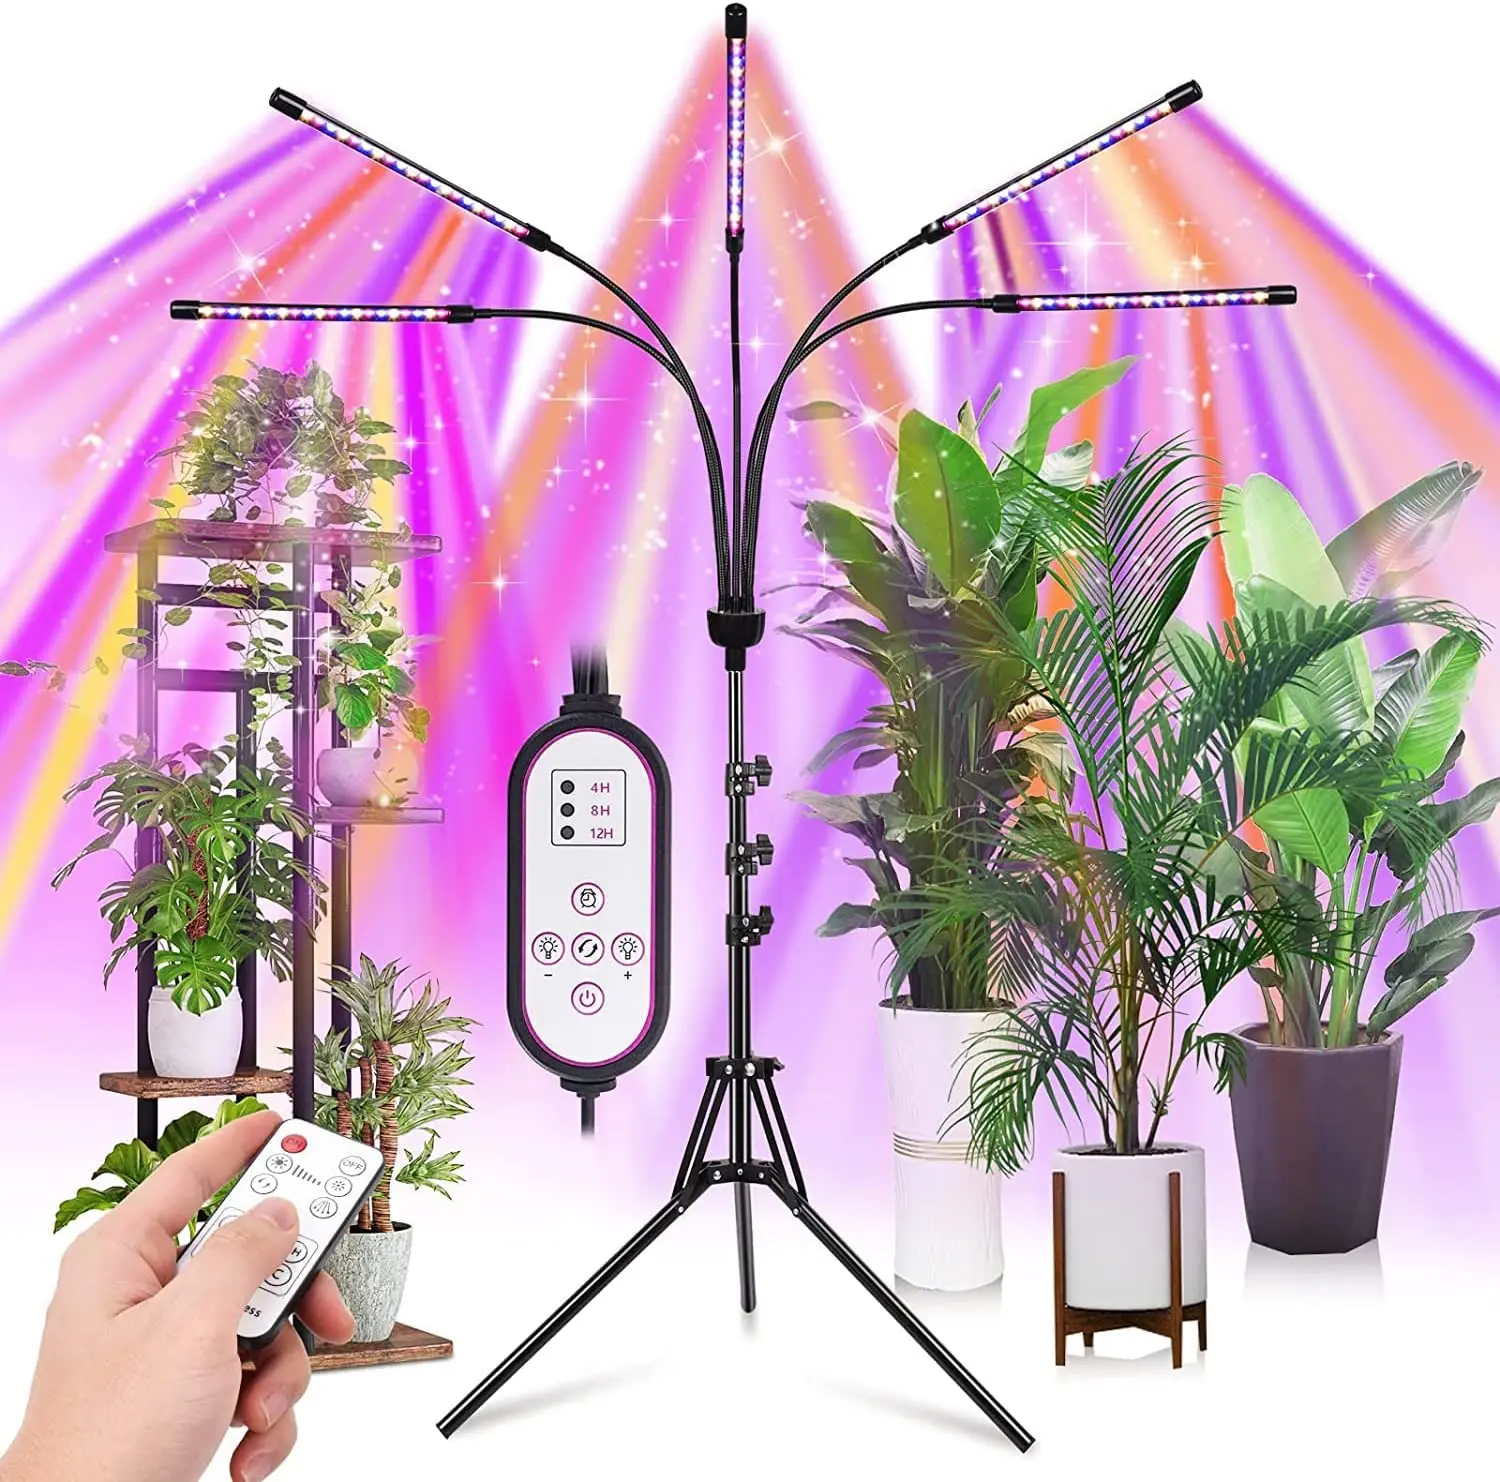 

5 Heads Grow Lights for Indoor Plants Red Blue Spectrum, 10 Dimmable Brightness, 4/8/12H Timer, 3 Switch Model